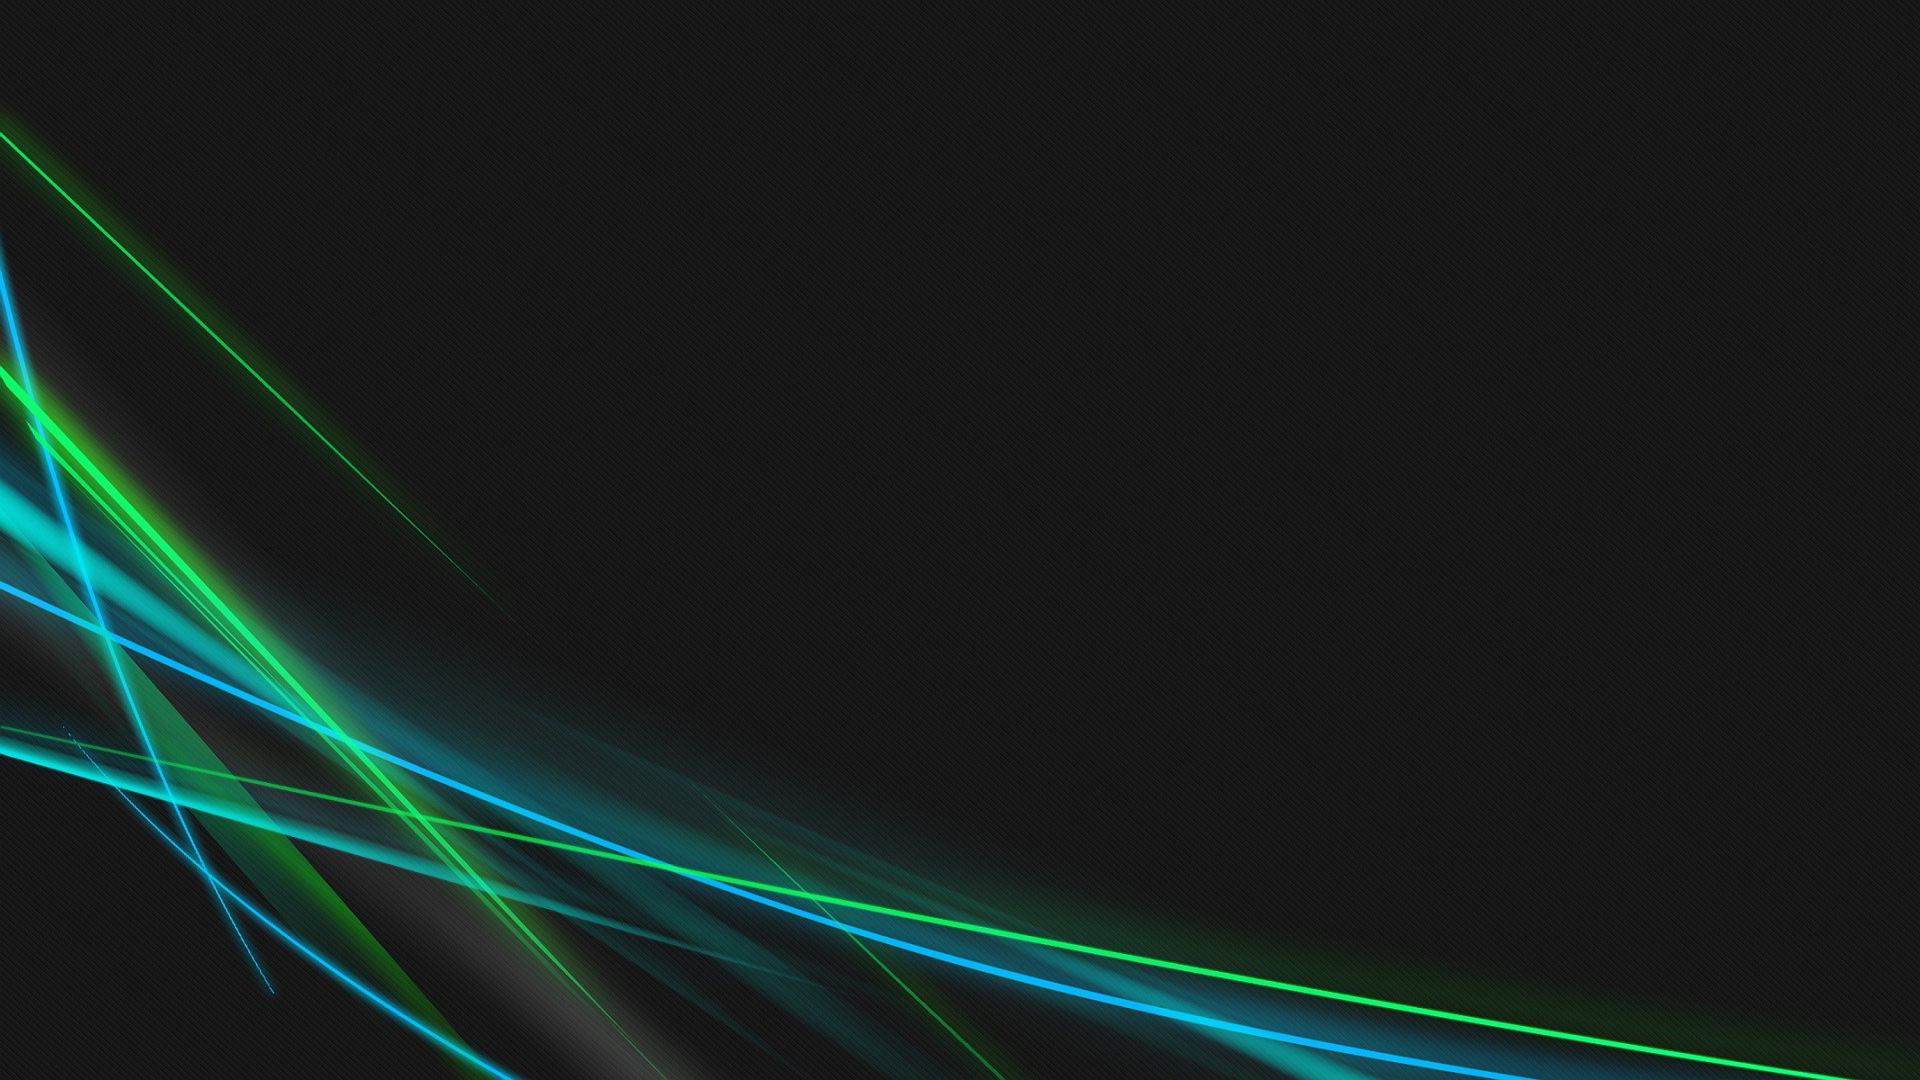 1920x1080 Blue and green neon curves wallpaper 6551 